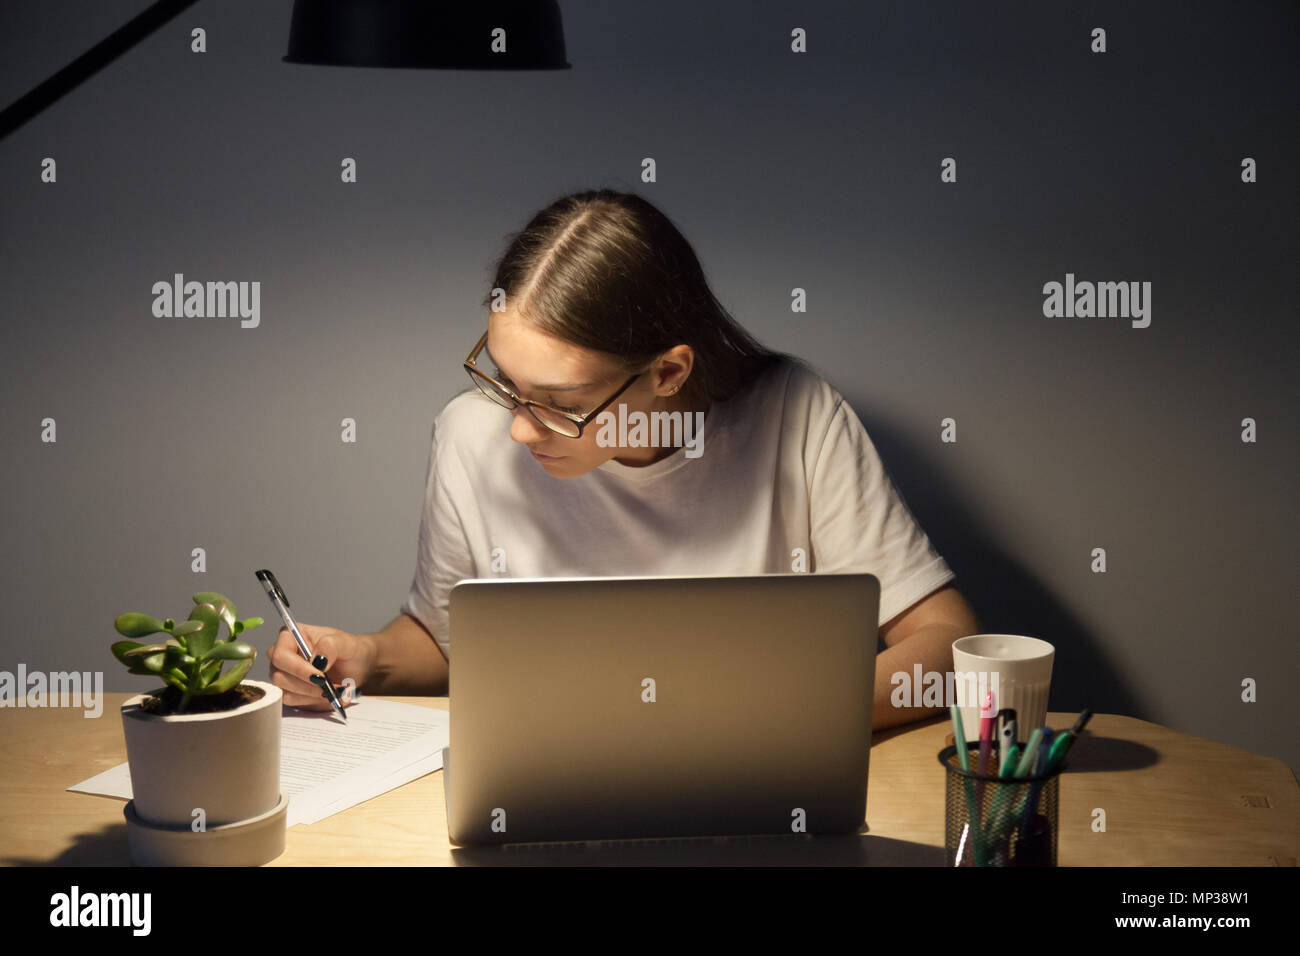 Focused student preparing for exam studying late hours Stock Photo